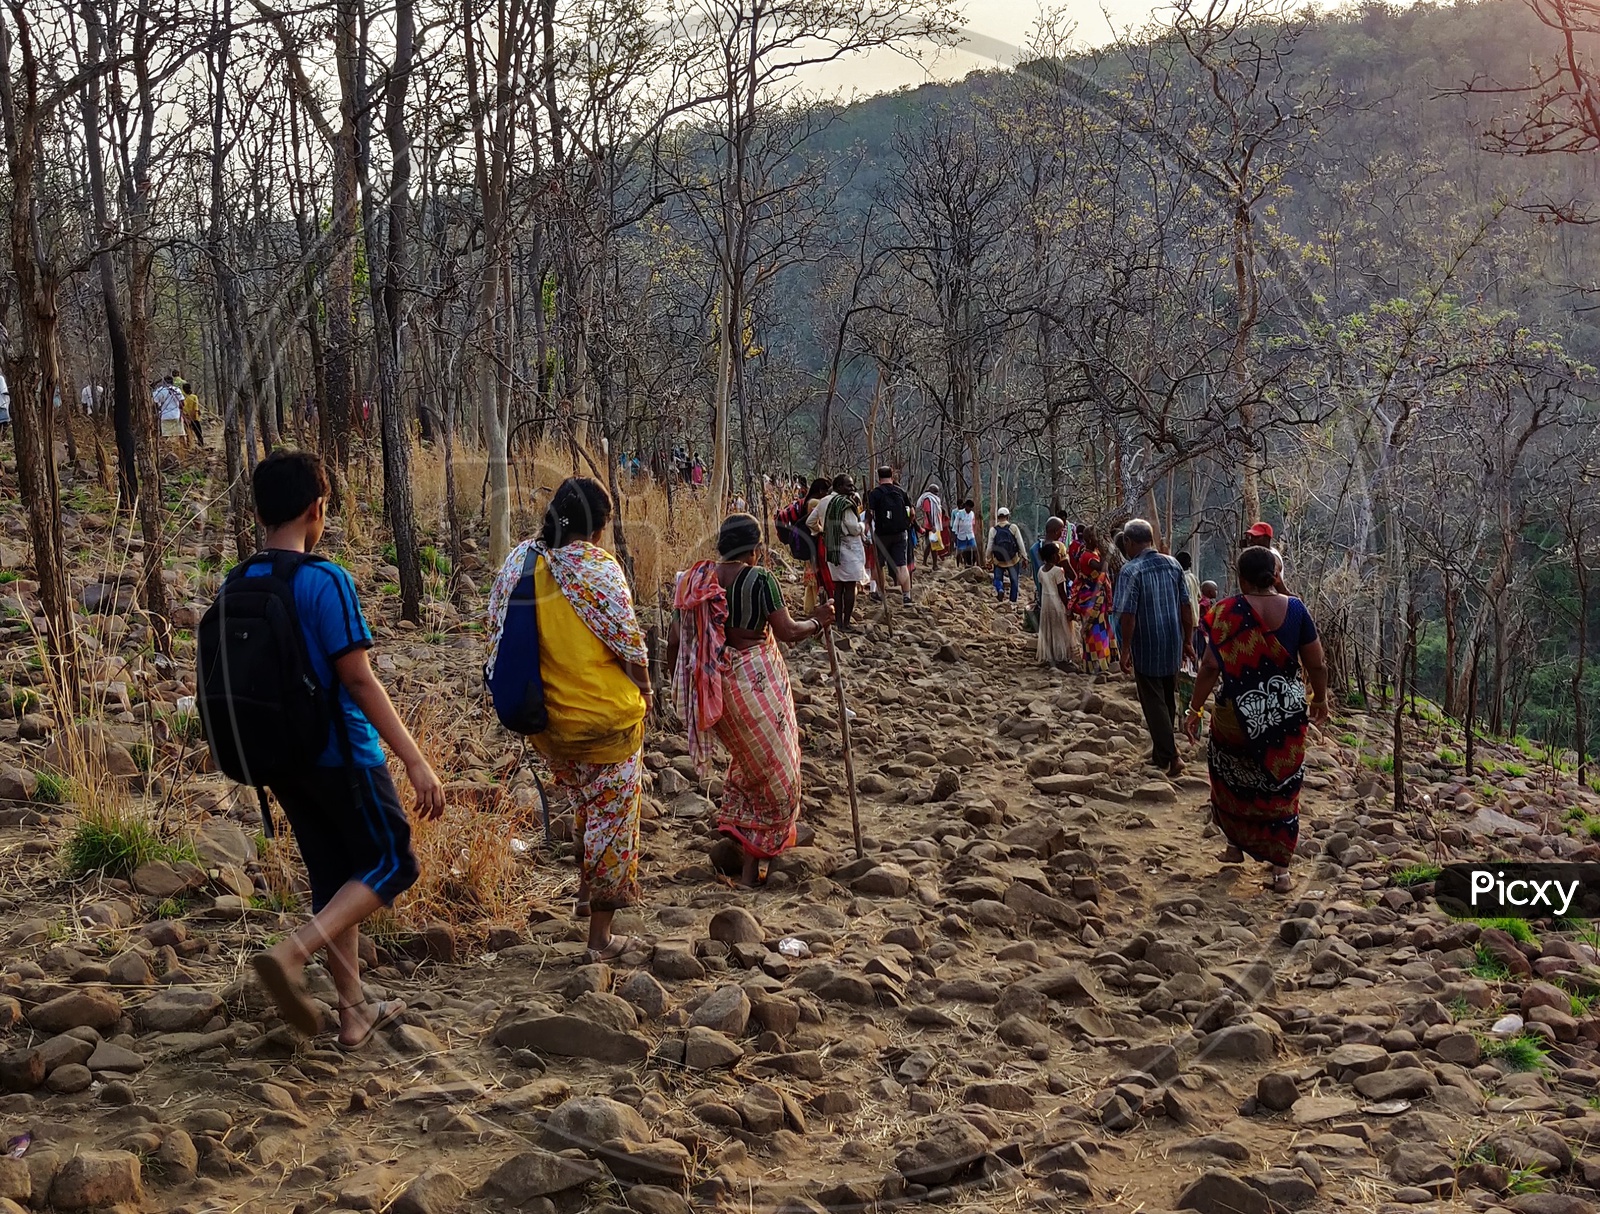 Devotees trekking The Hills For The Darshan of God In Hills or Forests Of Saleswaram